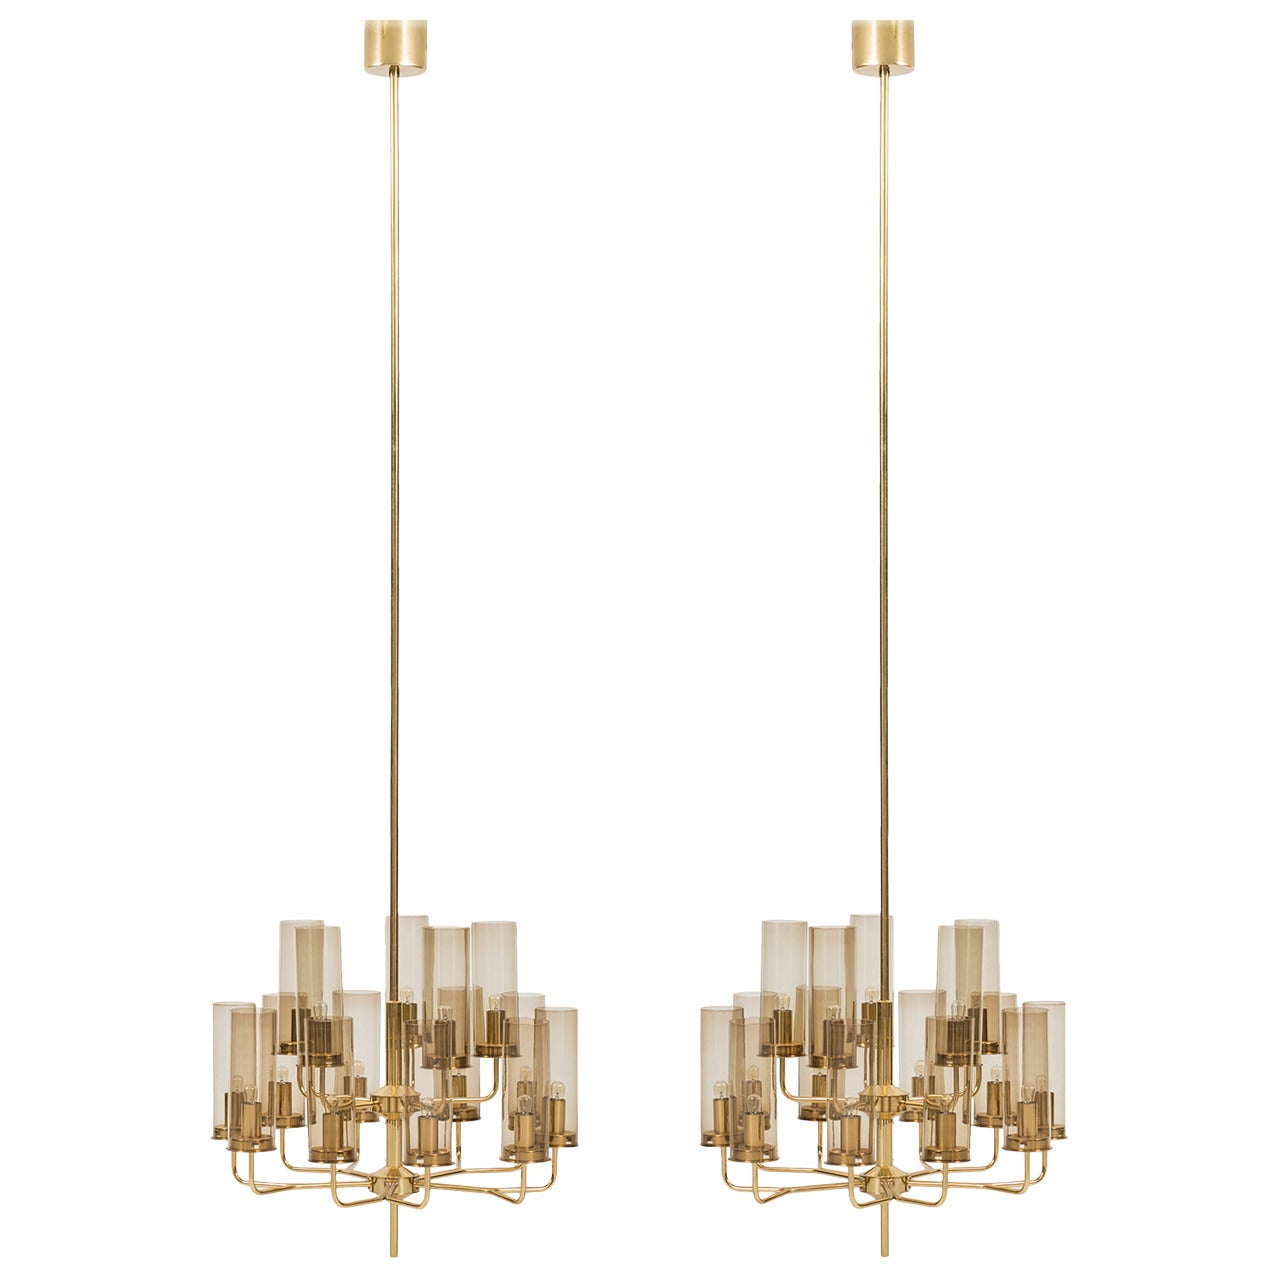 Big Pair of Hans-Agne Jakobsson Ceiling Lamps in Brass and Glass